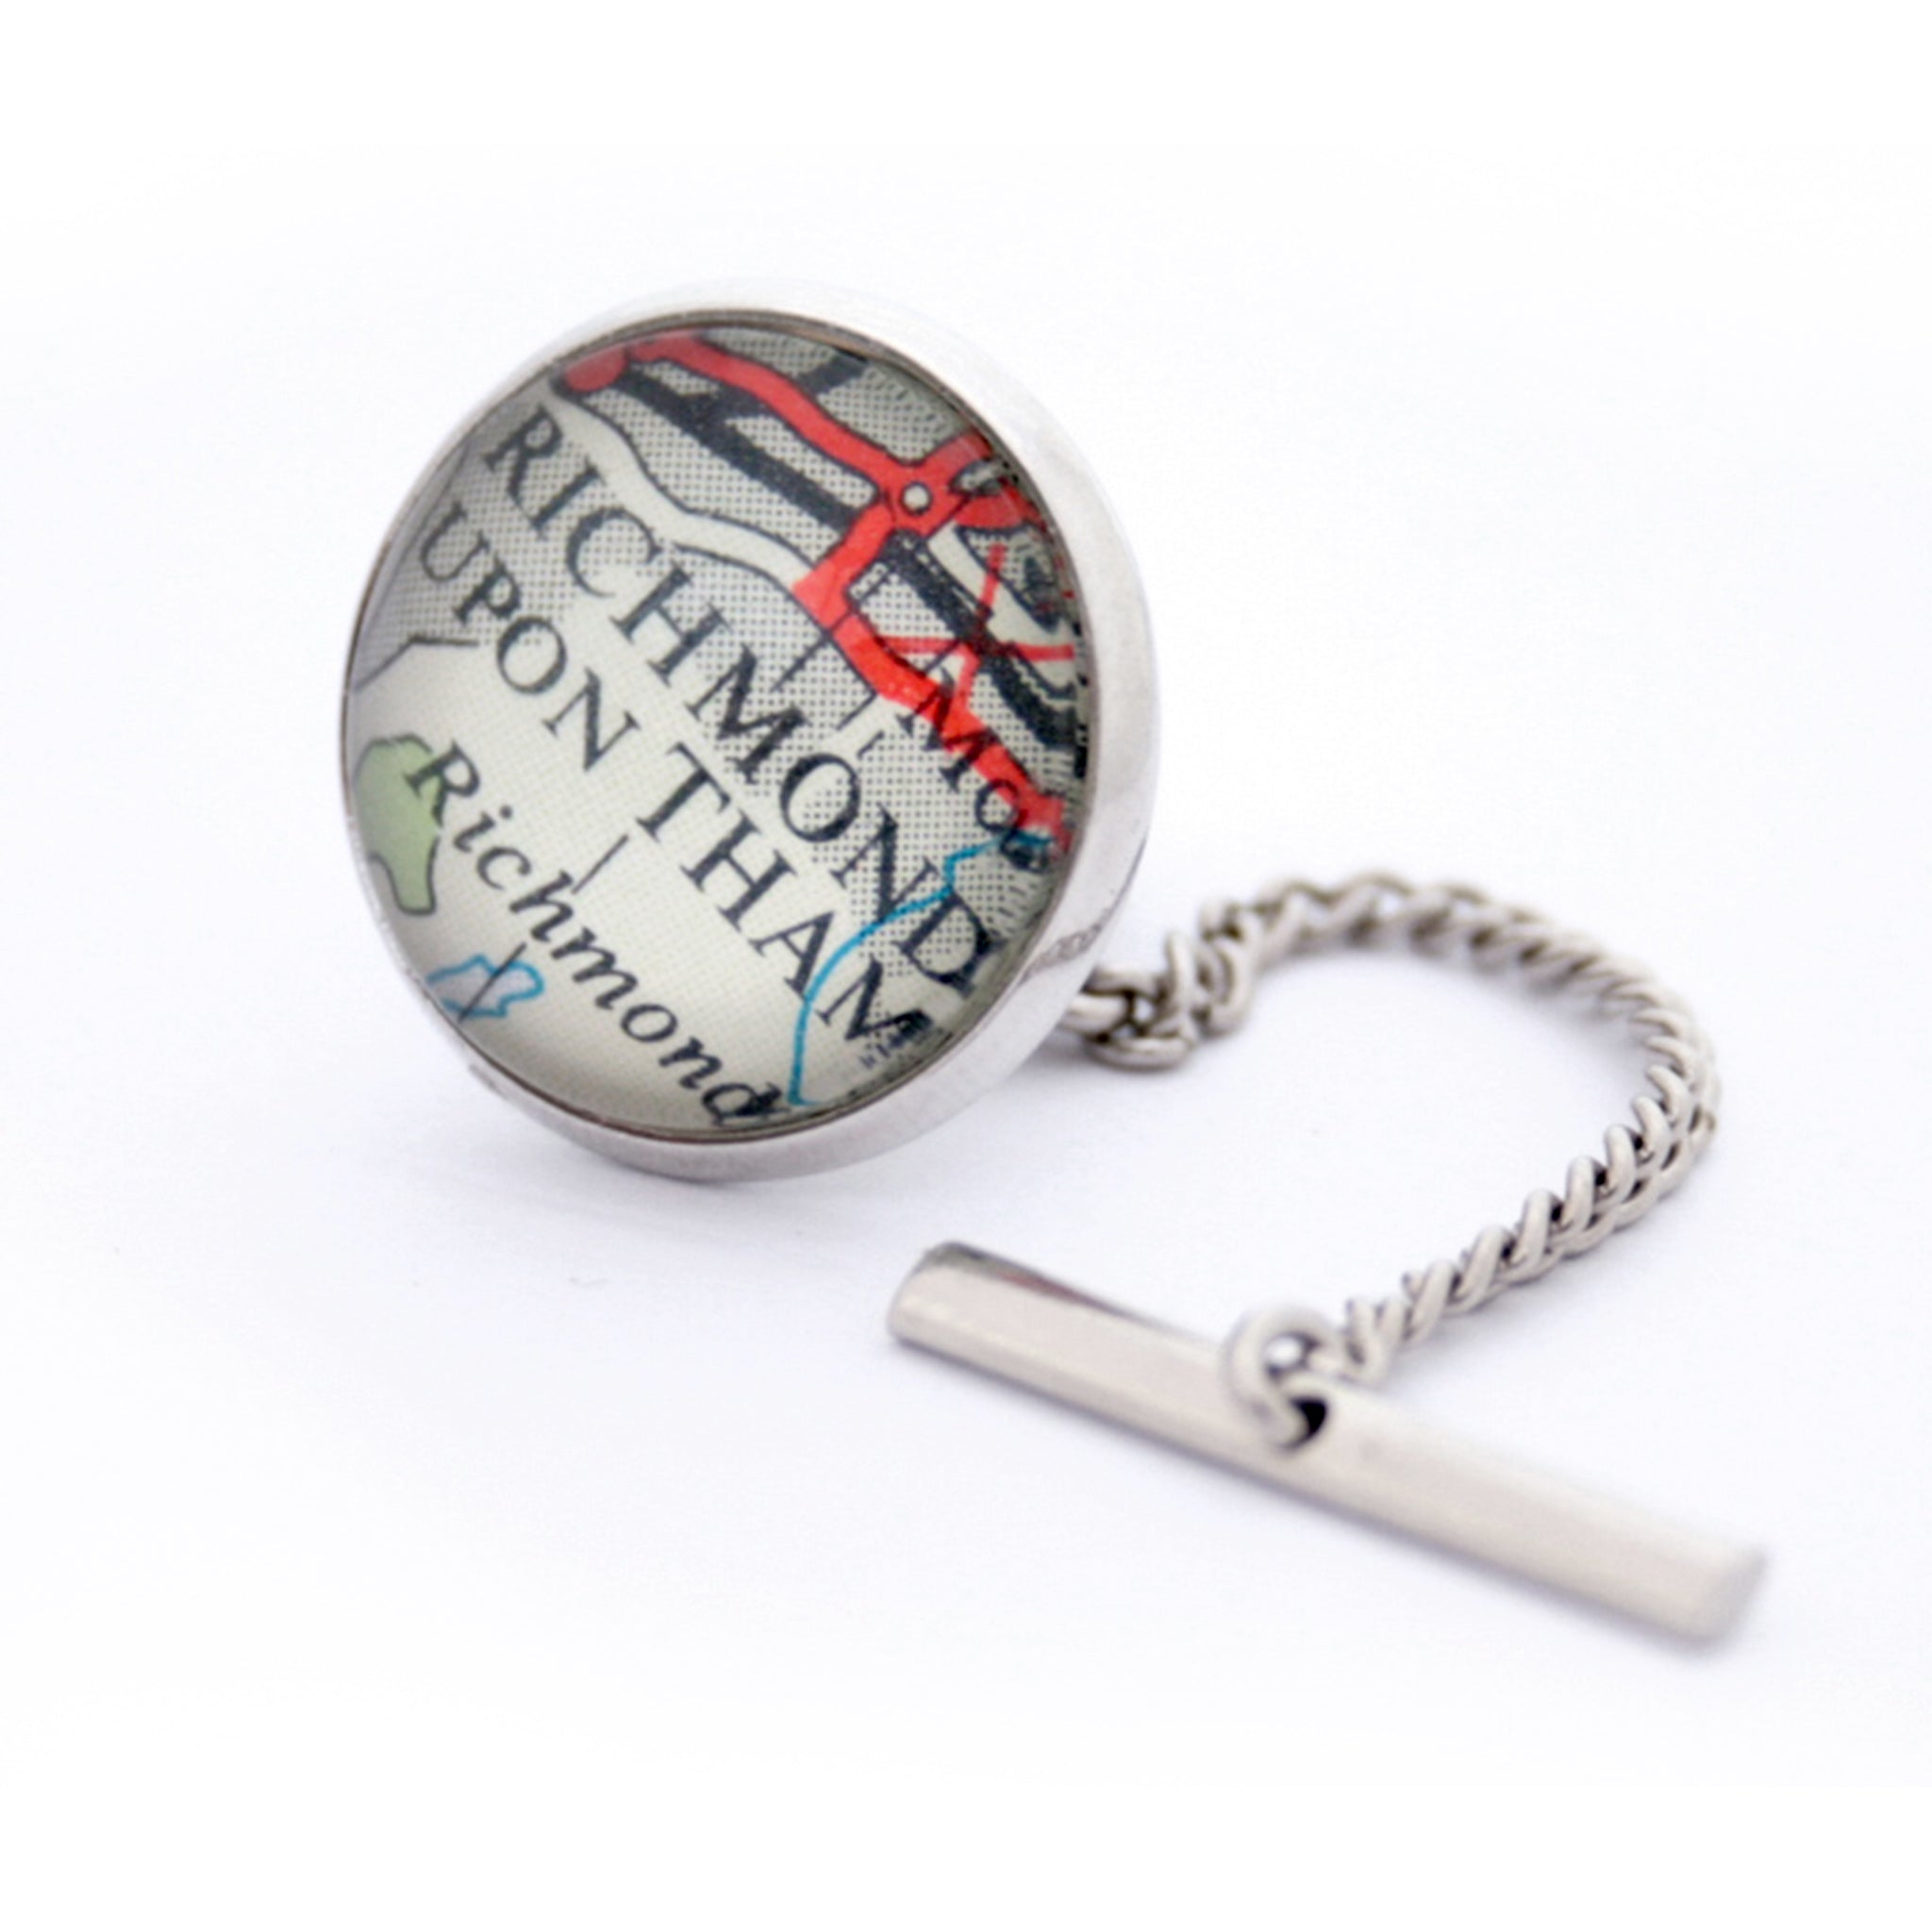 Personalised tie tack in silver color with custom map location